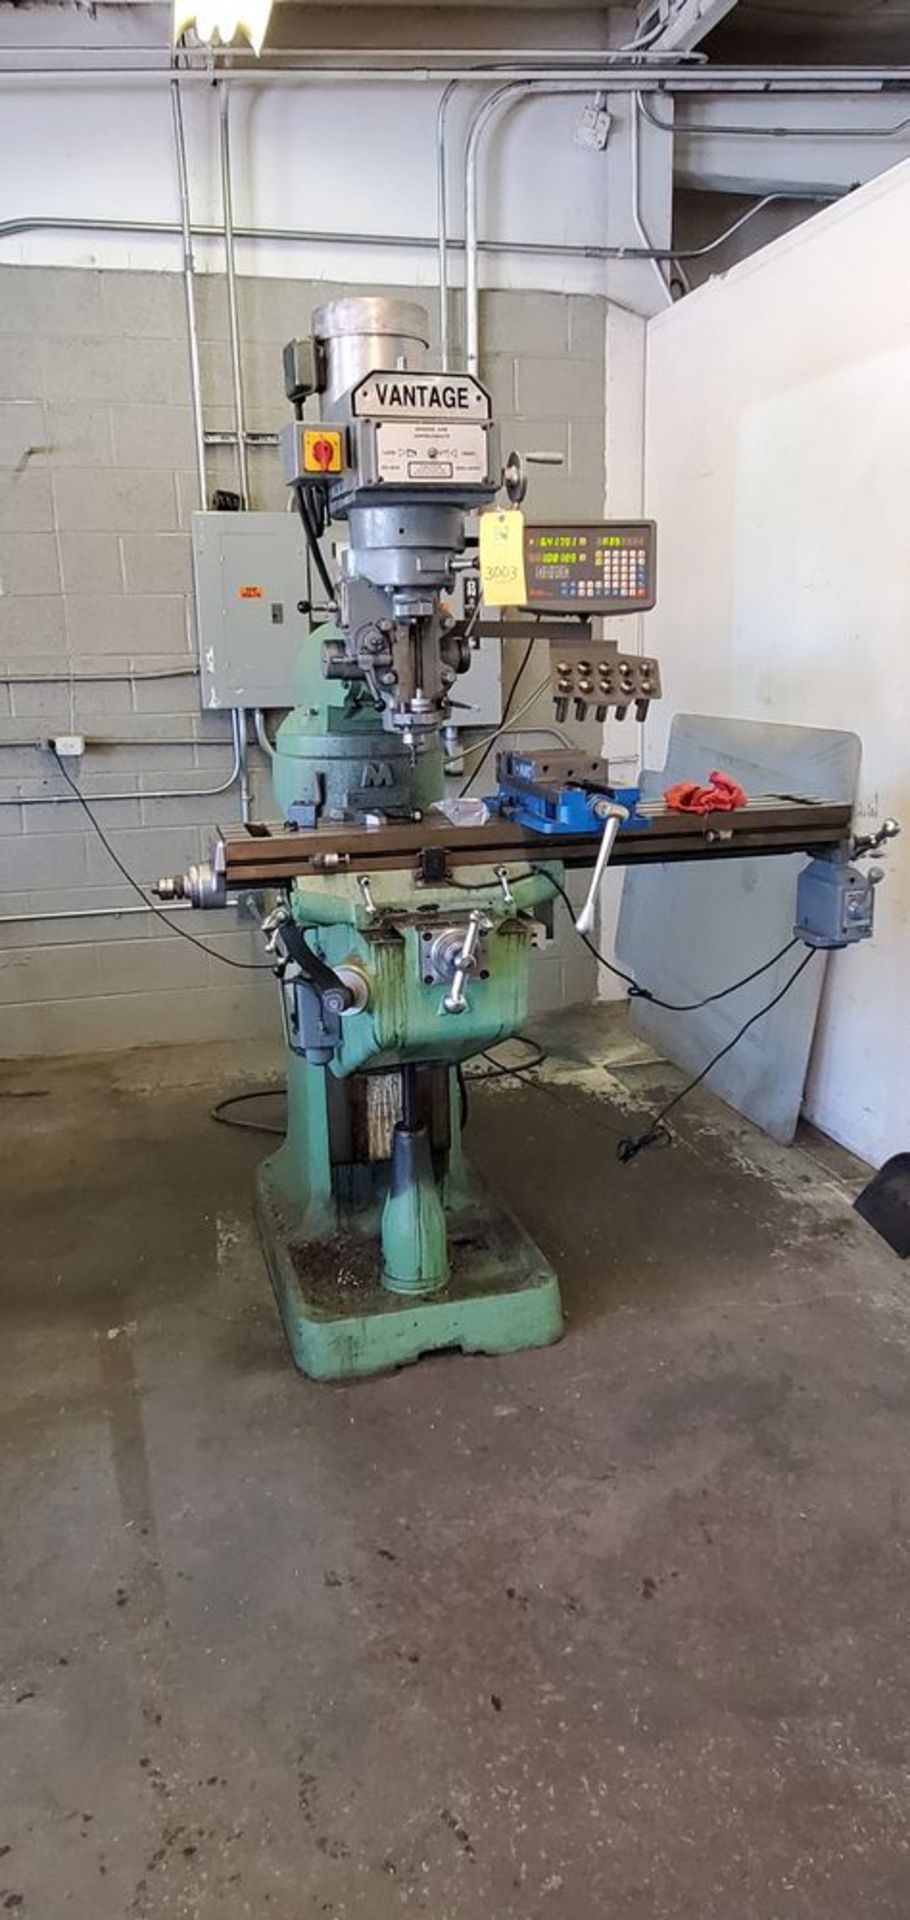 Located in Canon City, CO -- Vantage End Mill Vertical Knee Mill 3HP Make: Jih Fong Machinery with a